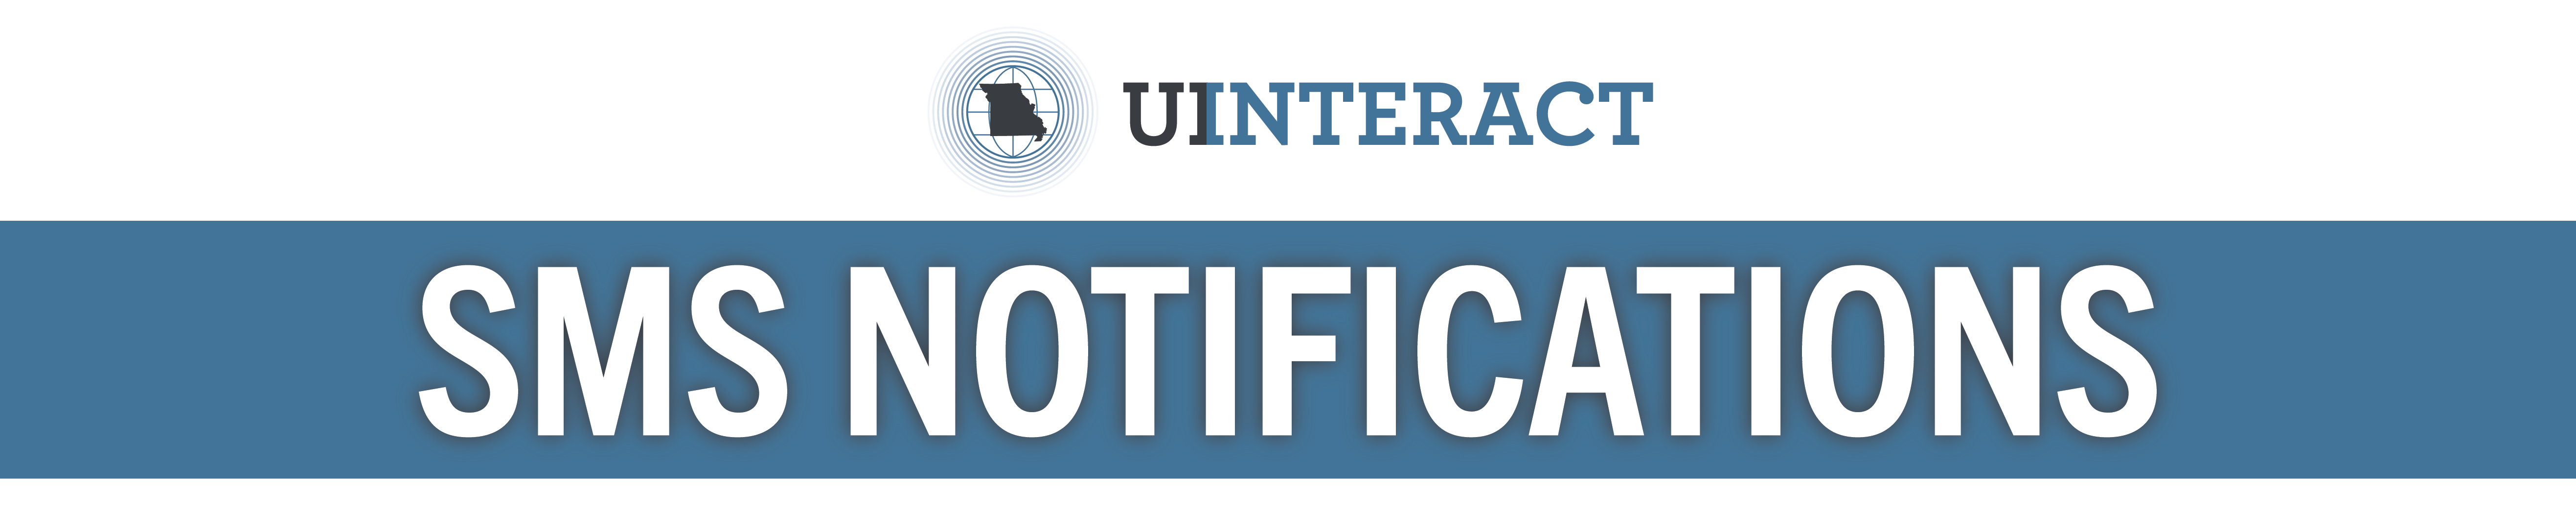 UInteract SMS Notifications